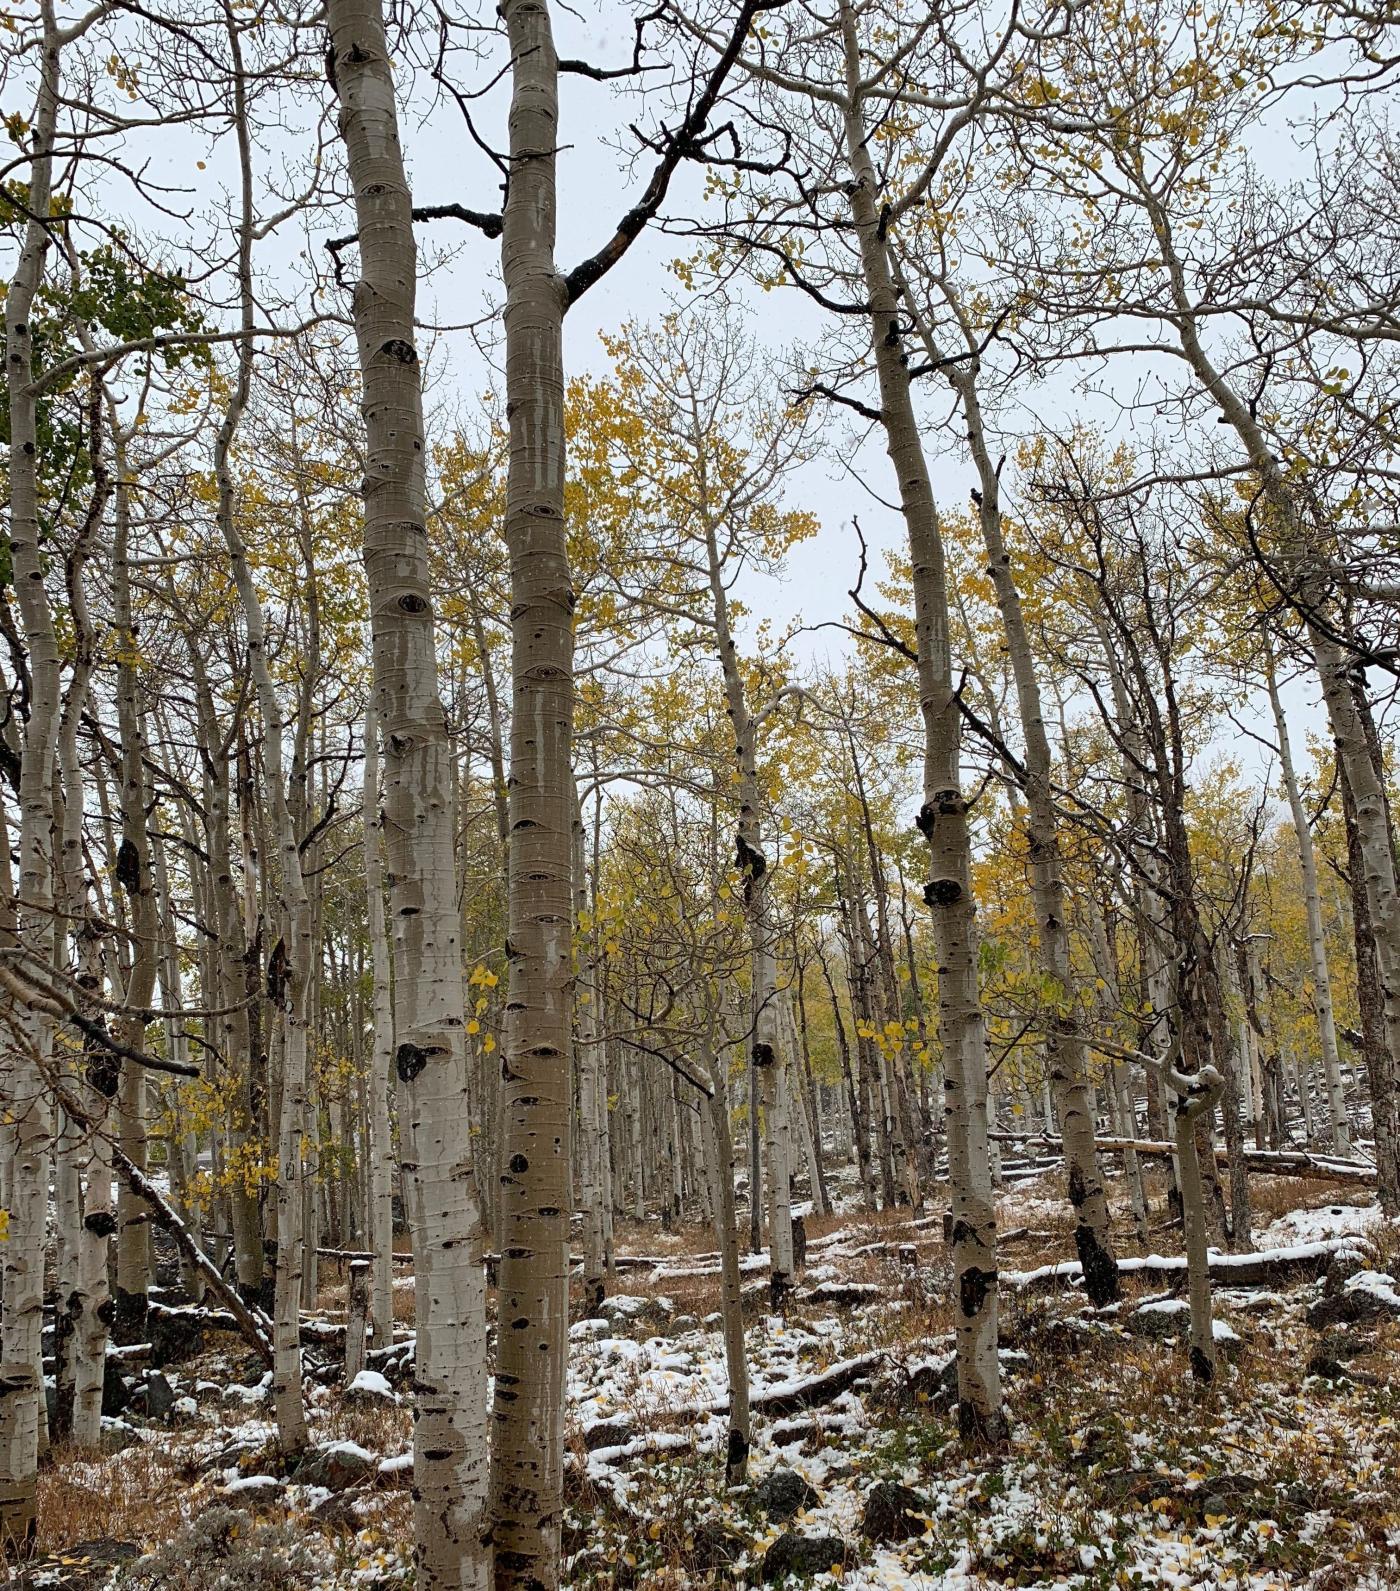 Pando, the world's largest organism, is dying thanks to